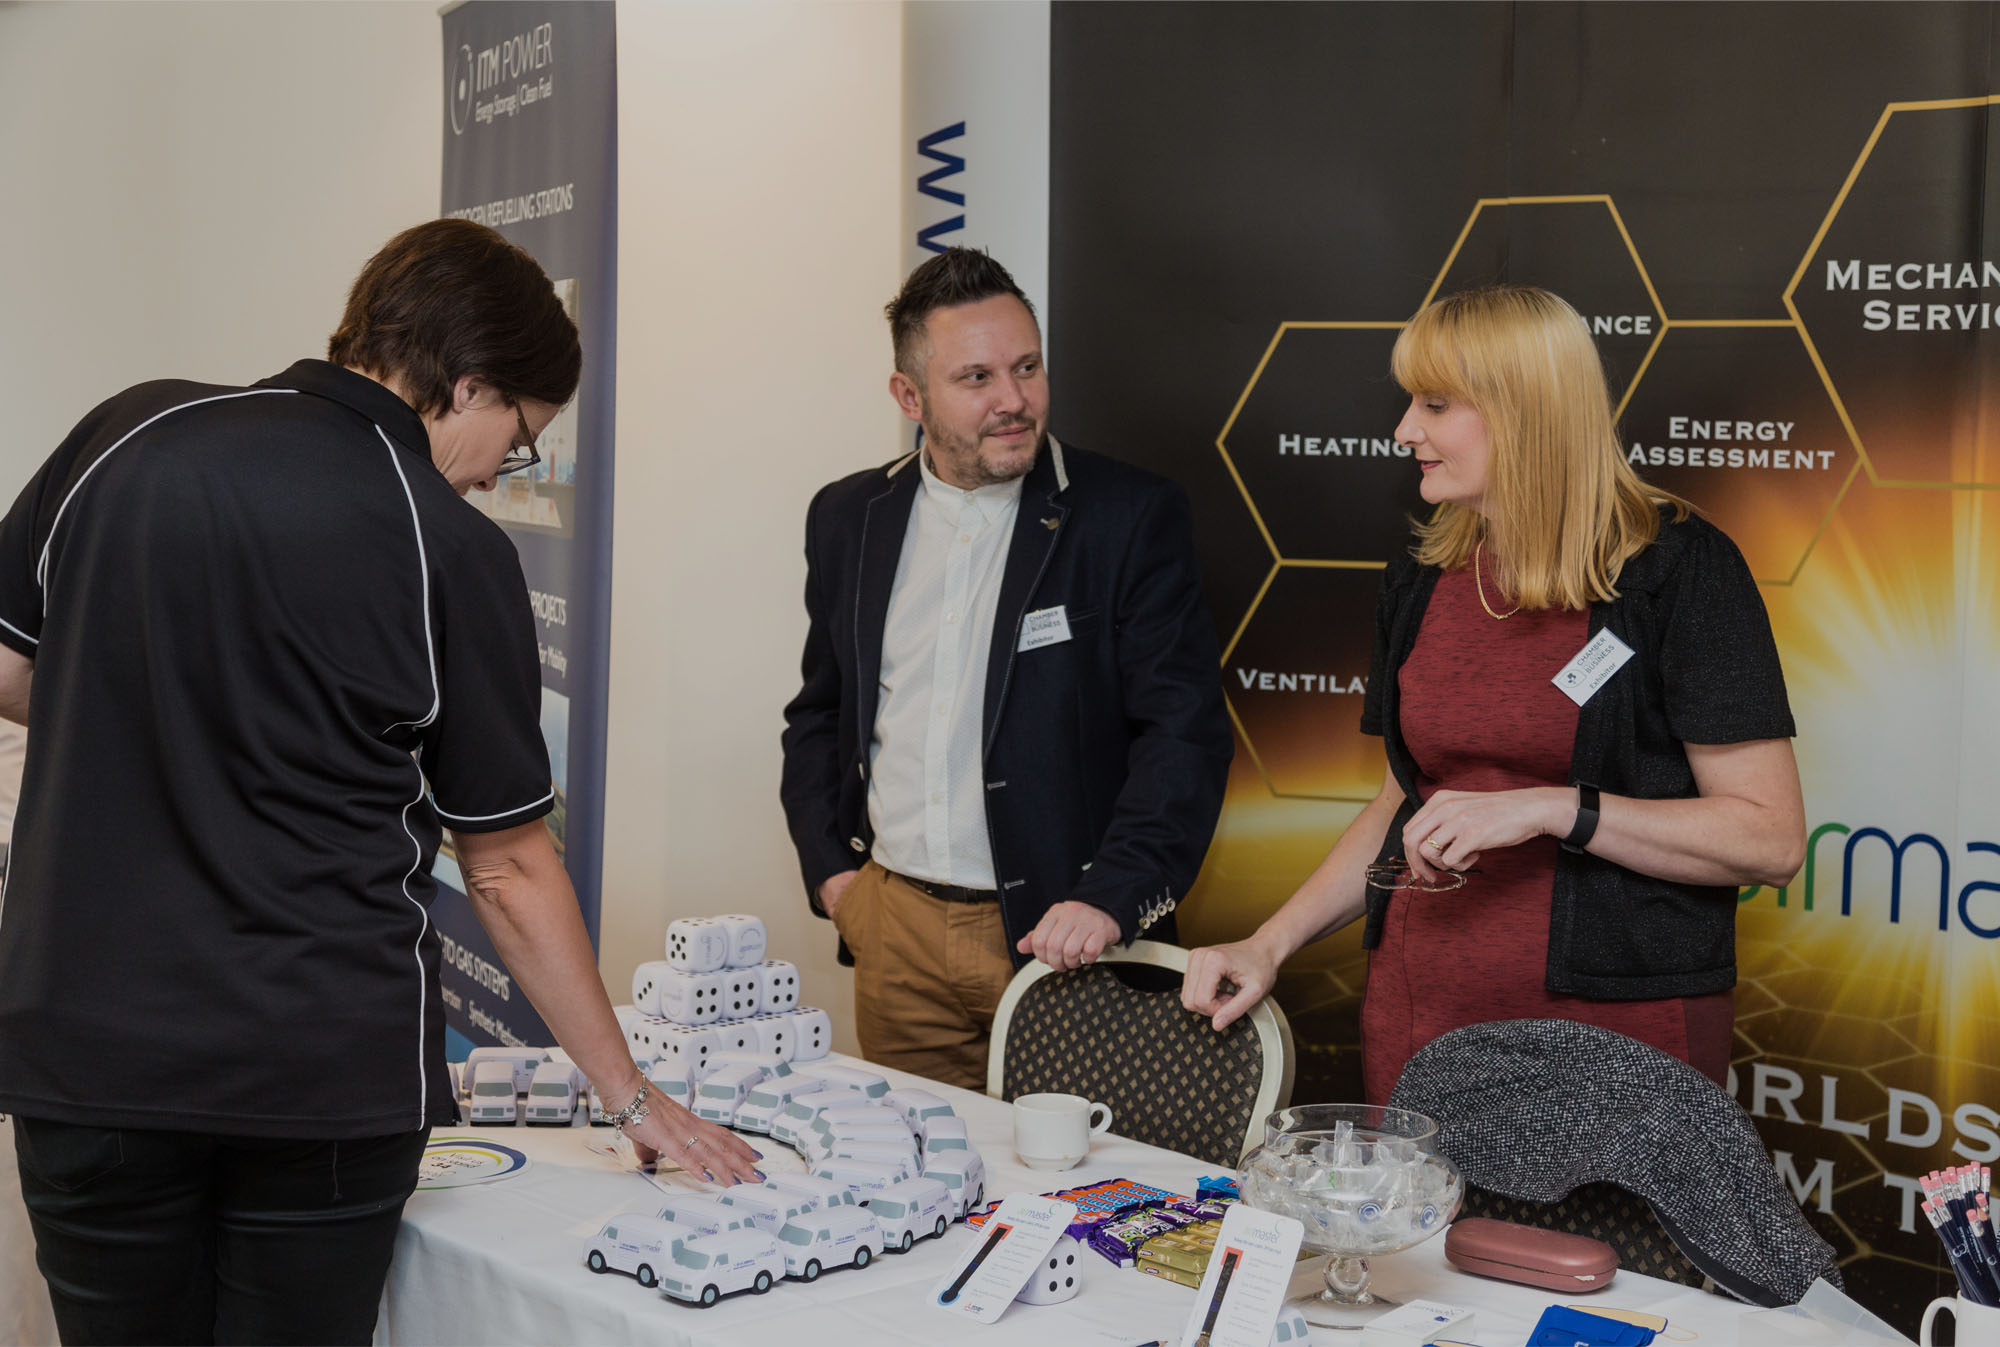 Chamber Means Business final exhibitors confirmed